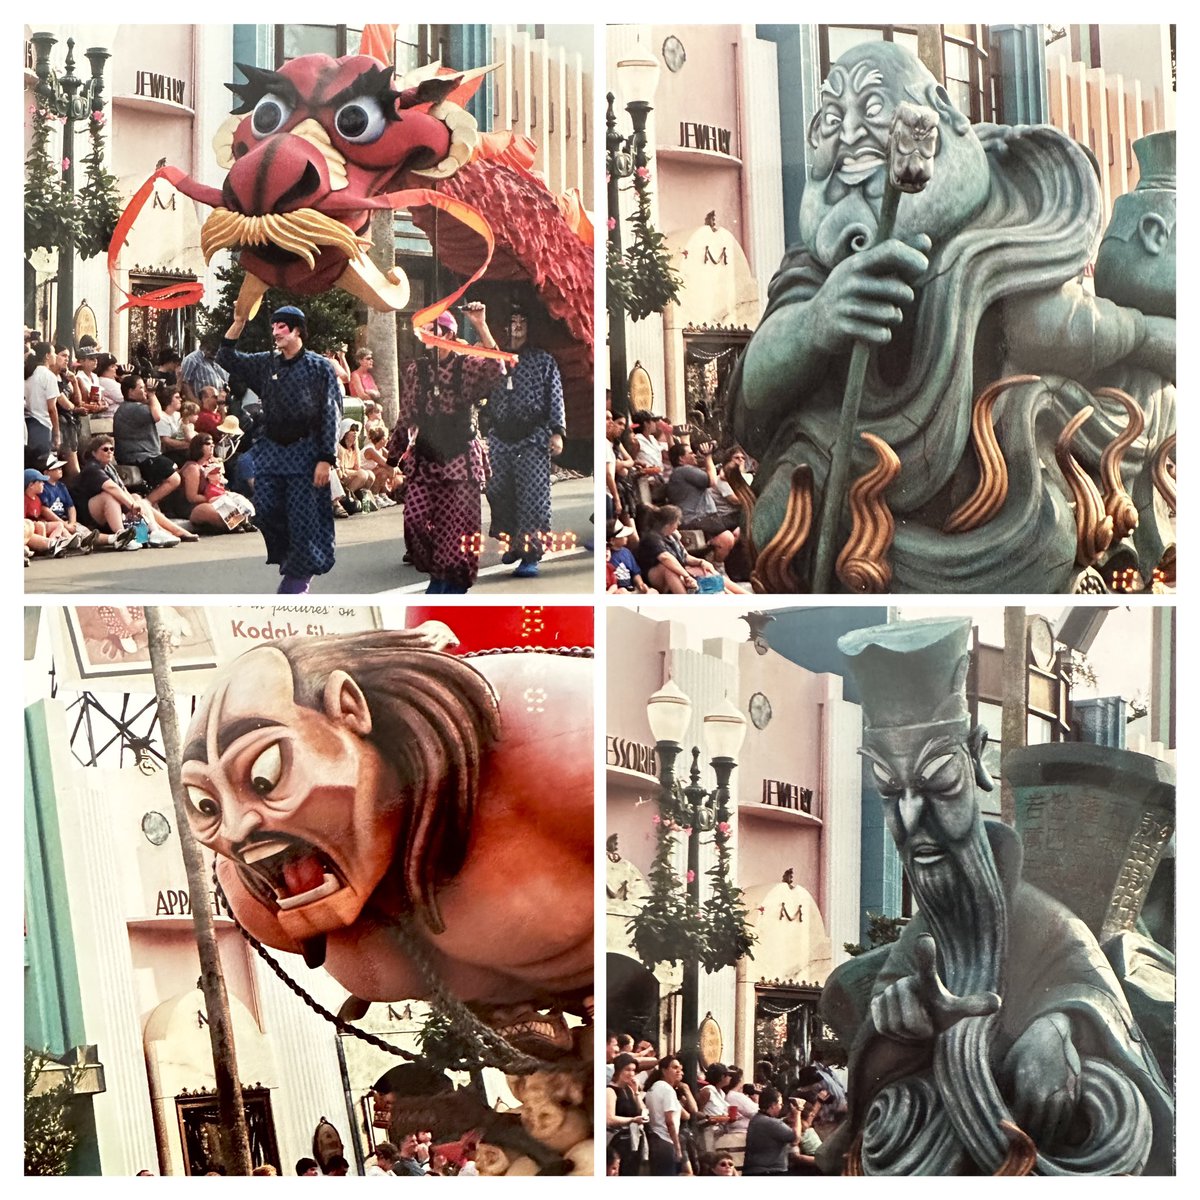 The Mulan Parade at MGM Studios at #disneyworld in 2000. I find some of these floats scarier than the Boardwalk clown pool. Follow me for all things #waltdisneyworld past and present.